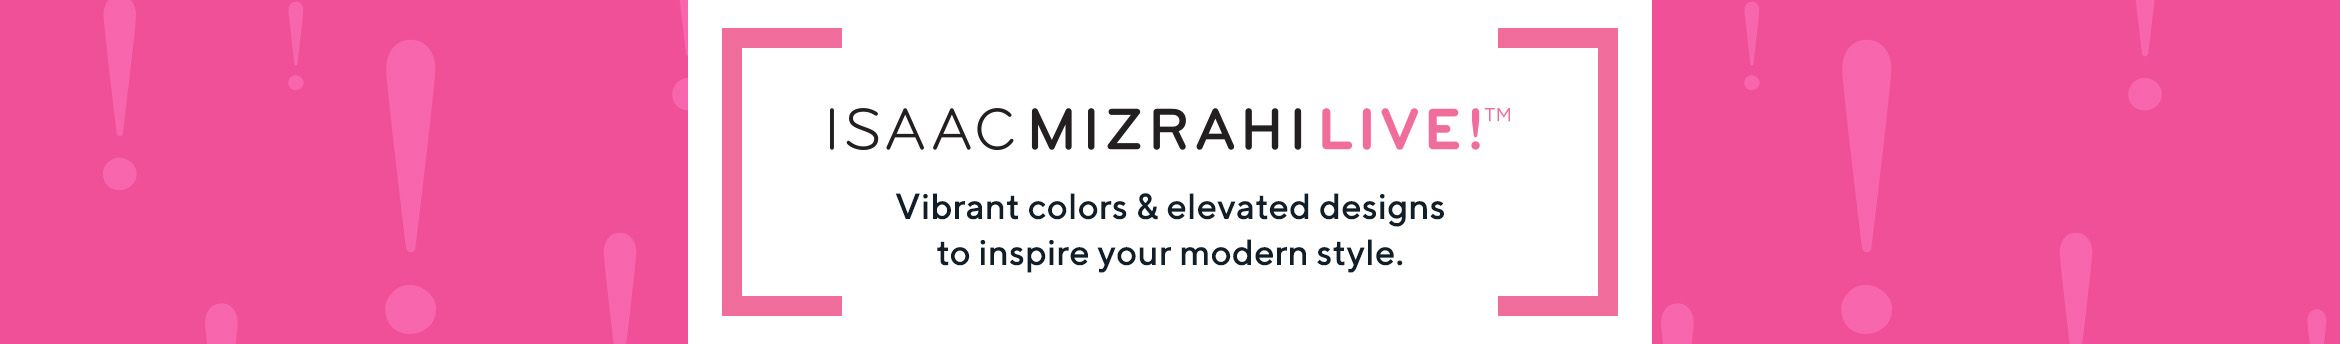 Isaac Mizrahi Live!™.  Vibrant colors & elevated designs to inspire your modern style.